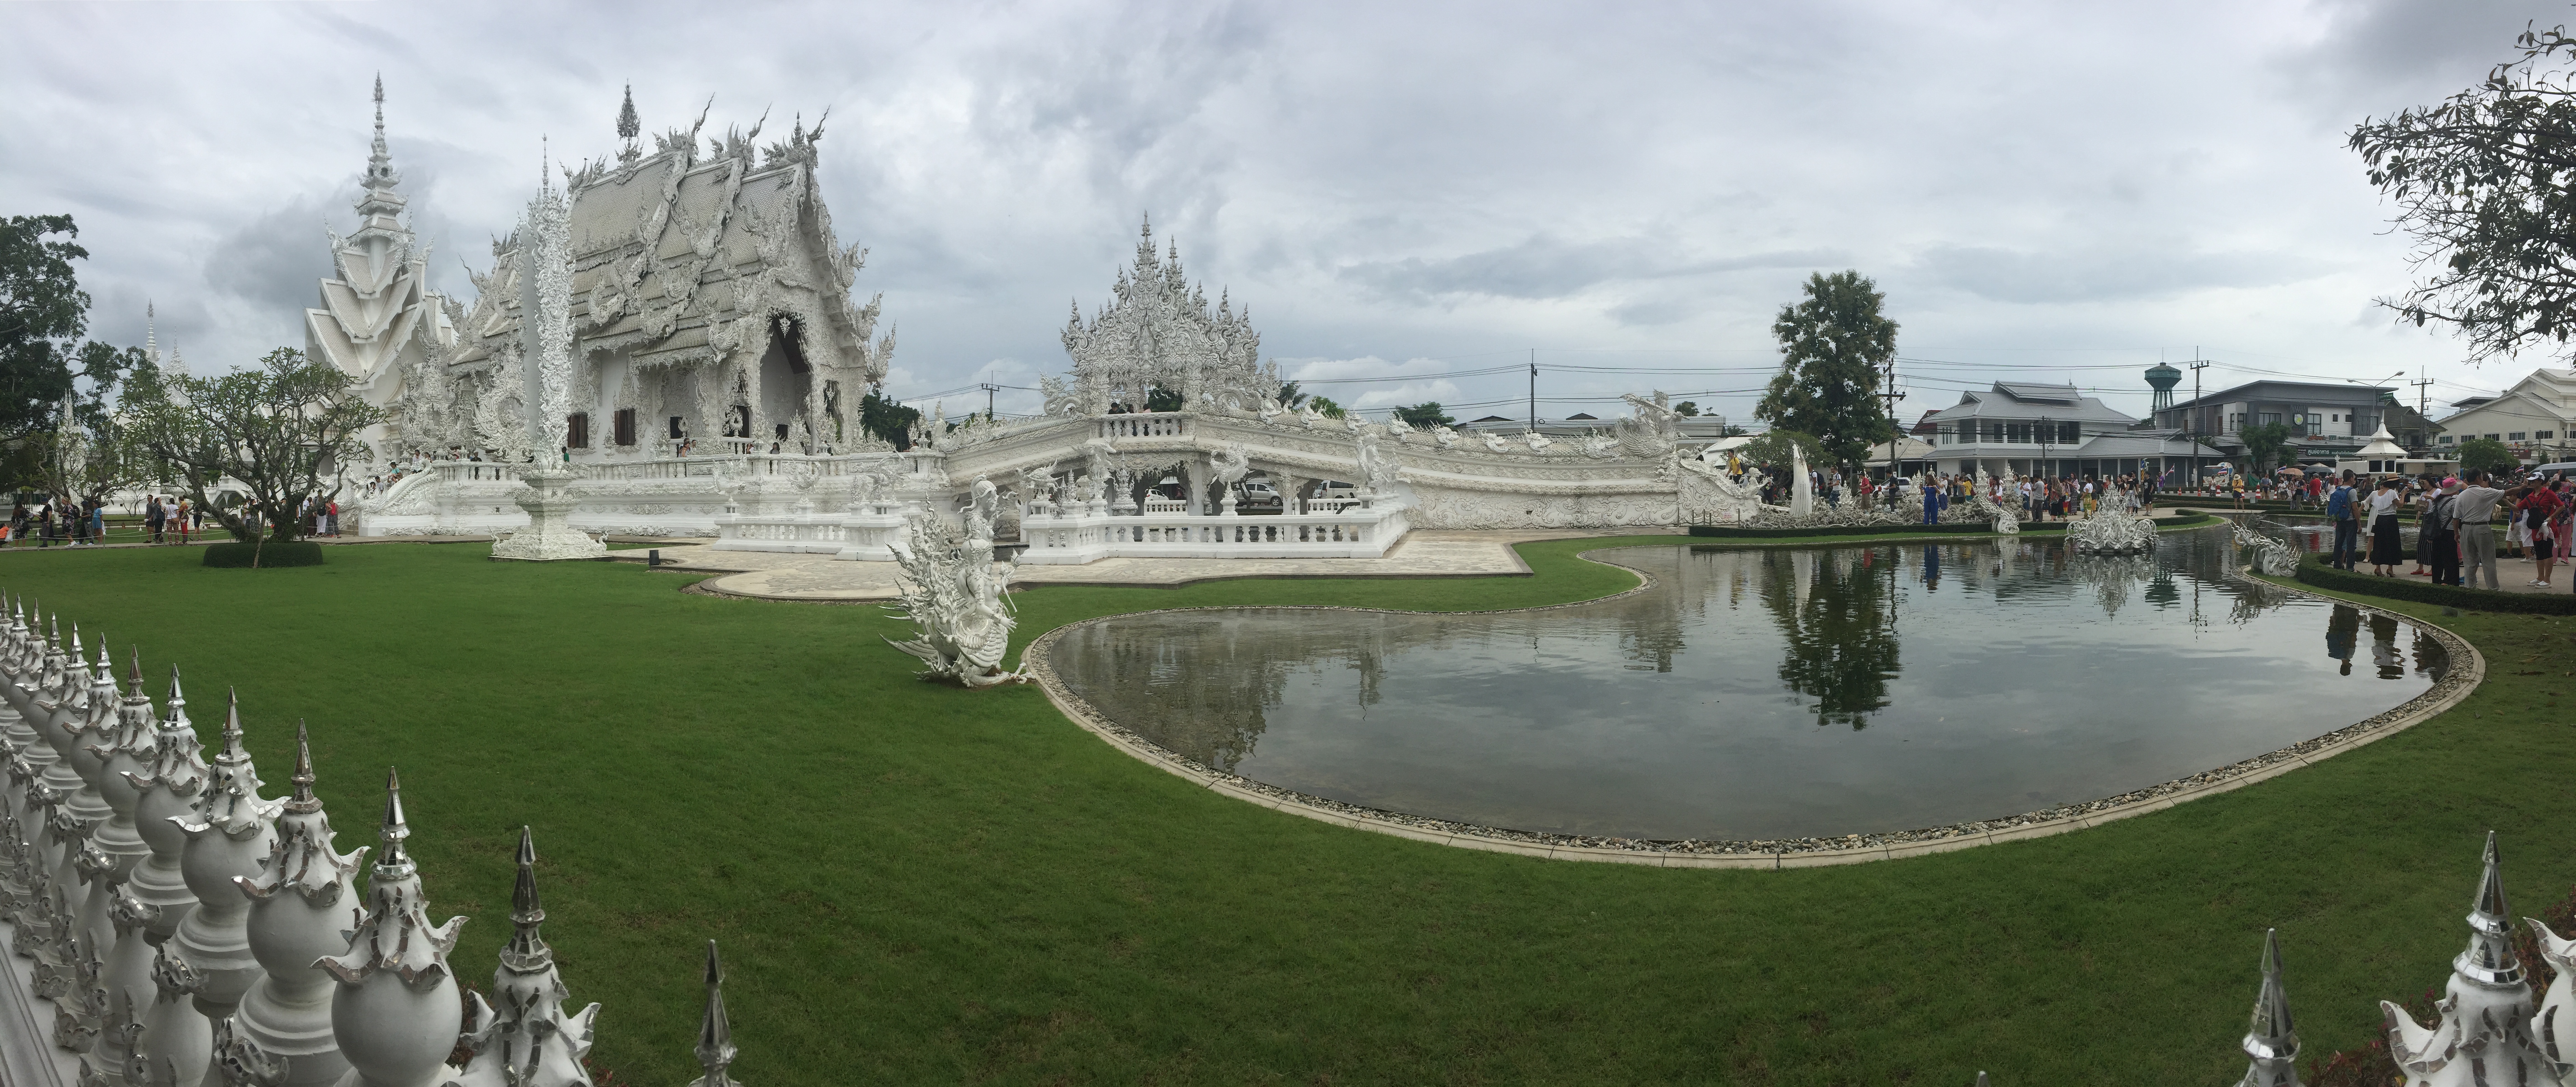 Chiang Rai, The White Temple, and Navigating Southeast Asia as an Embarrassed American